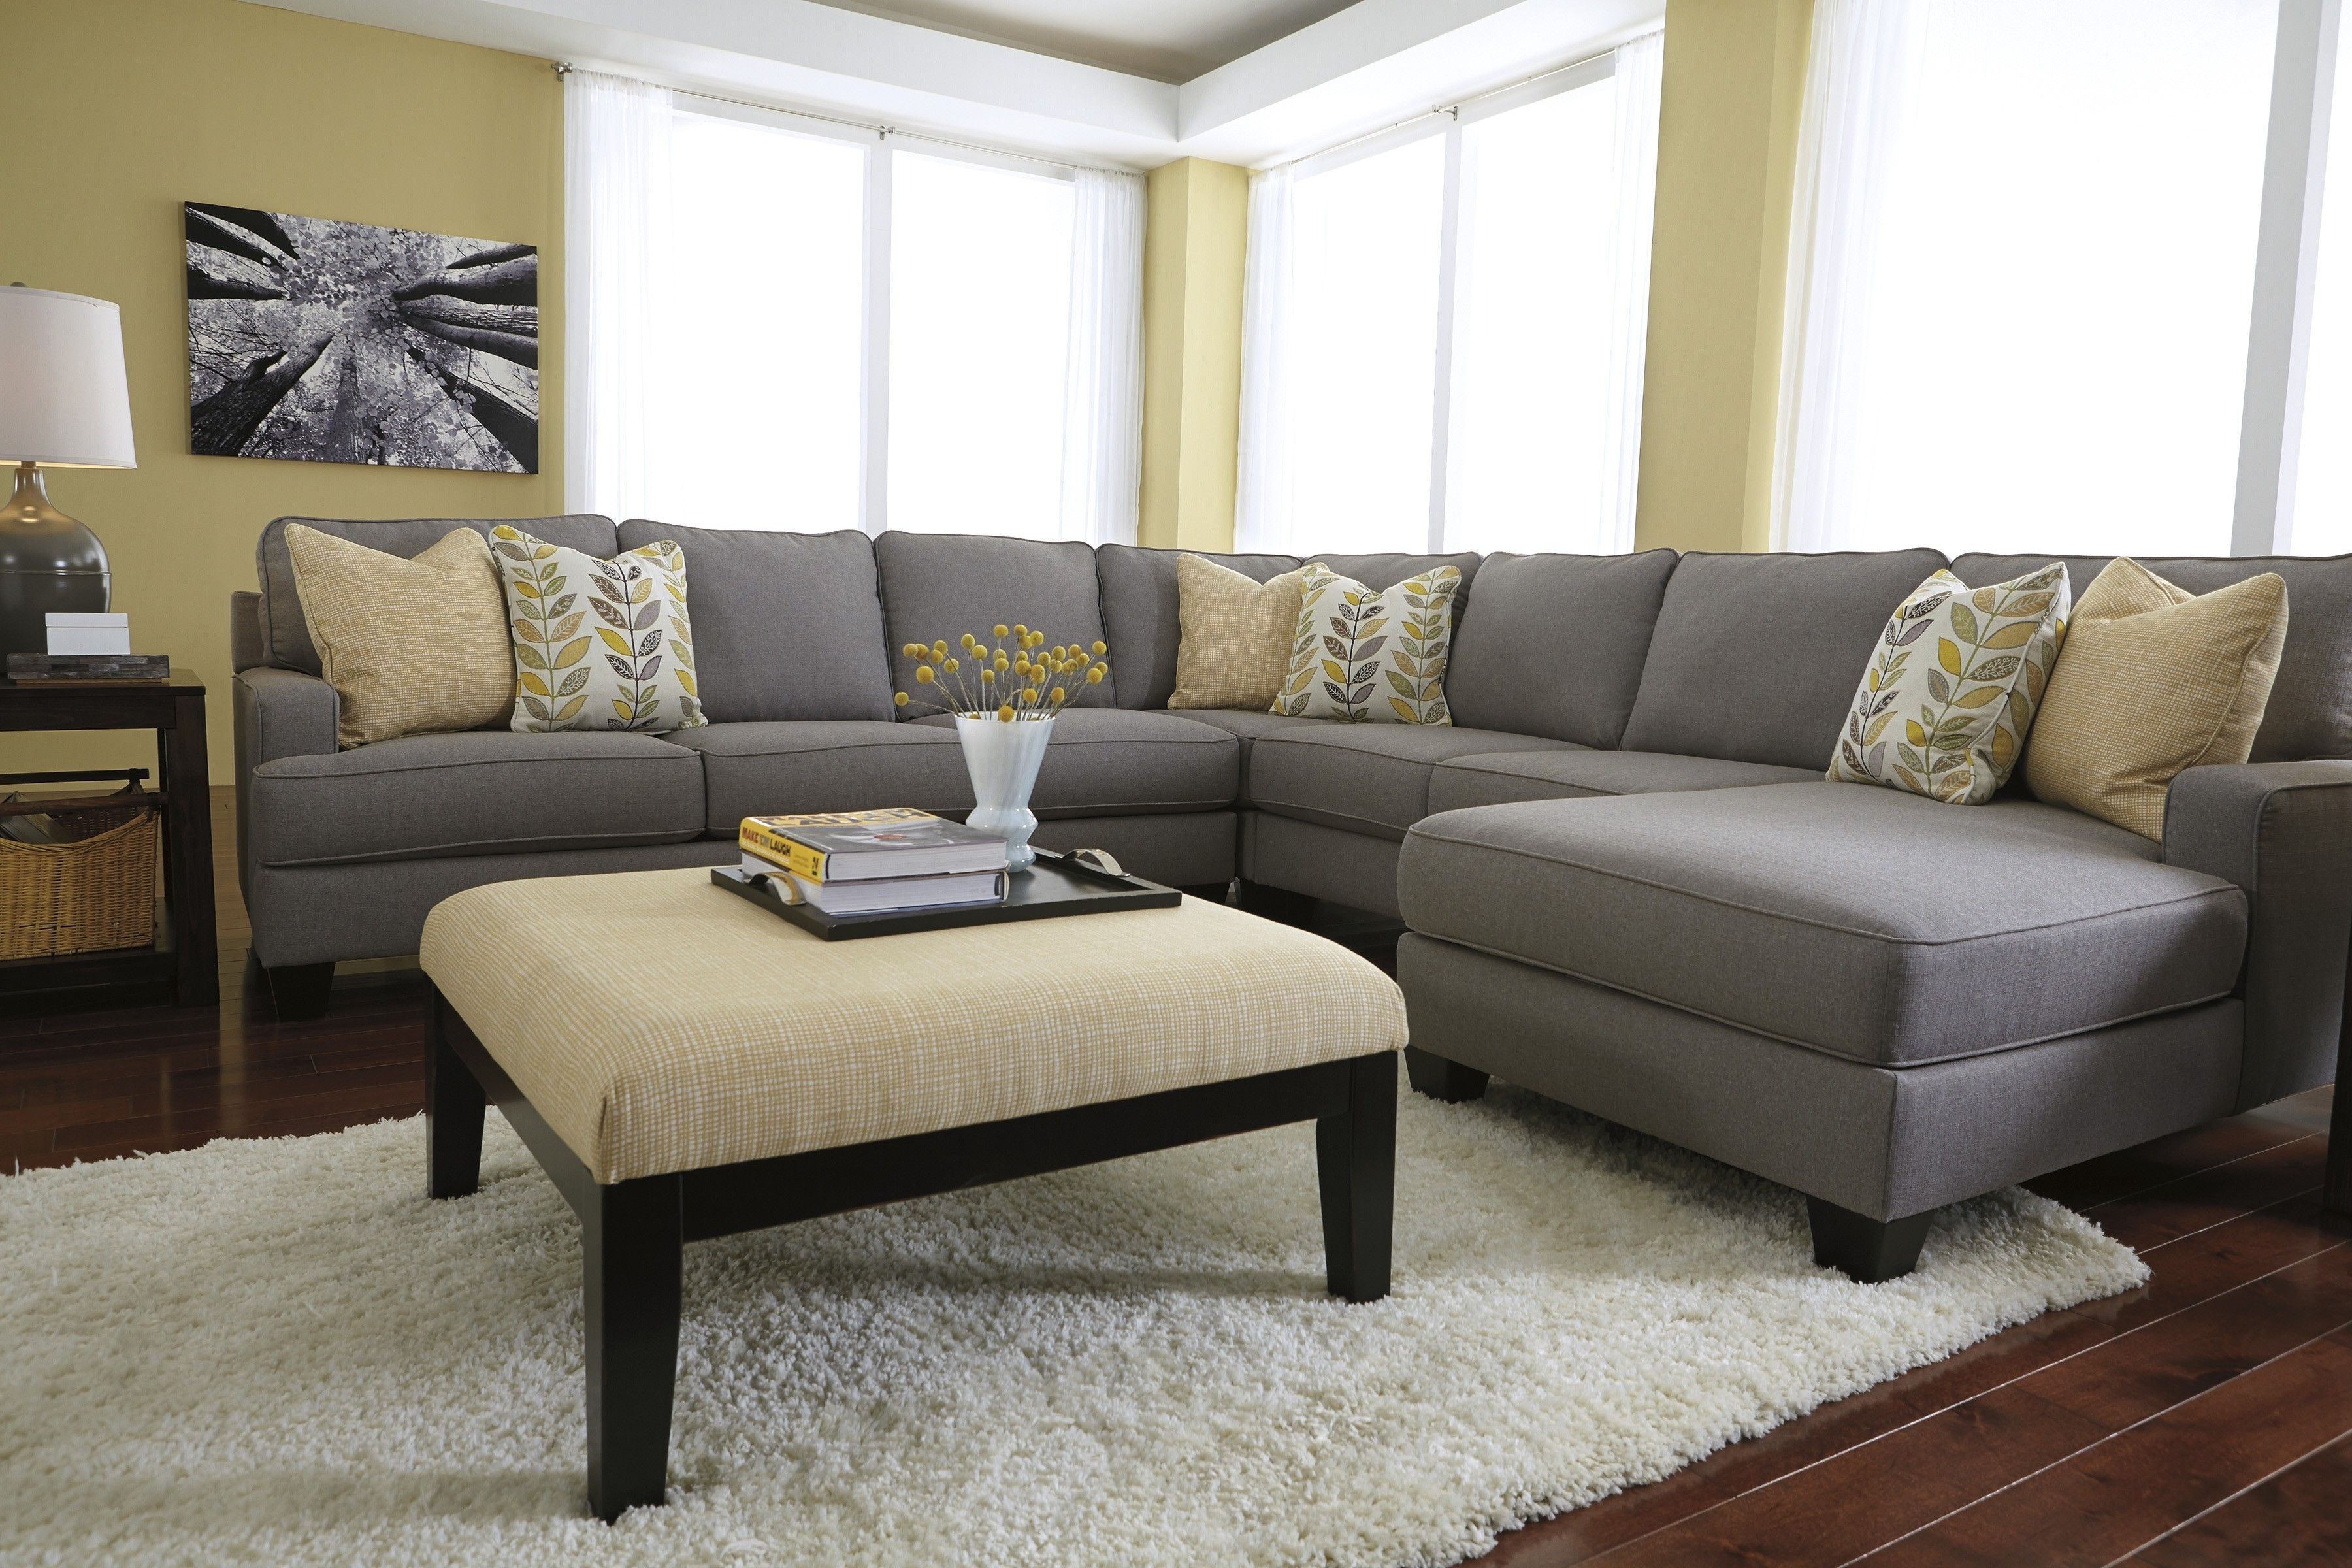 Cheap Sleeper Sofas Full Image For Chaise Lounge Sectional Living Inside 3 Piece Sectional Sleeper Sofa (View 8 of 12)